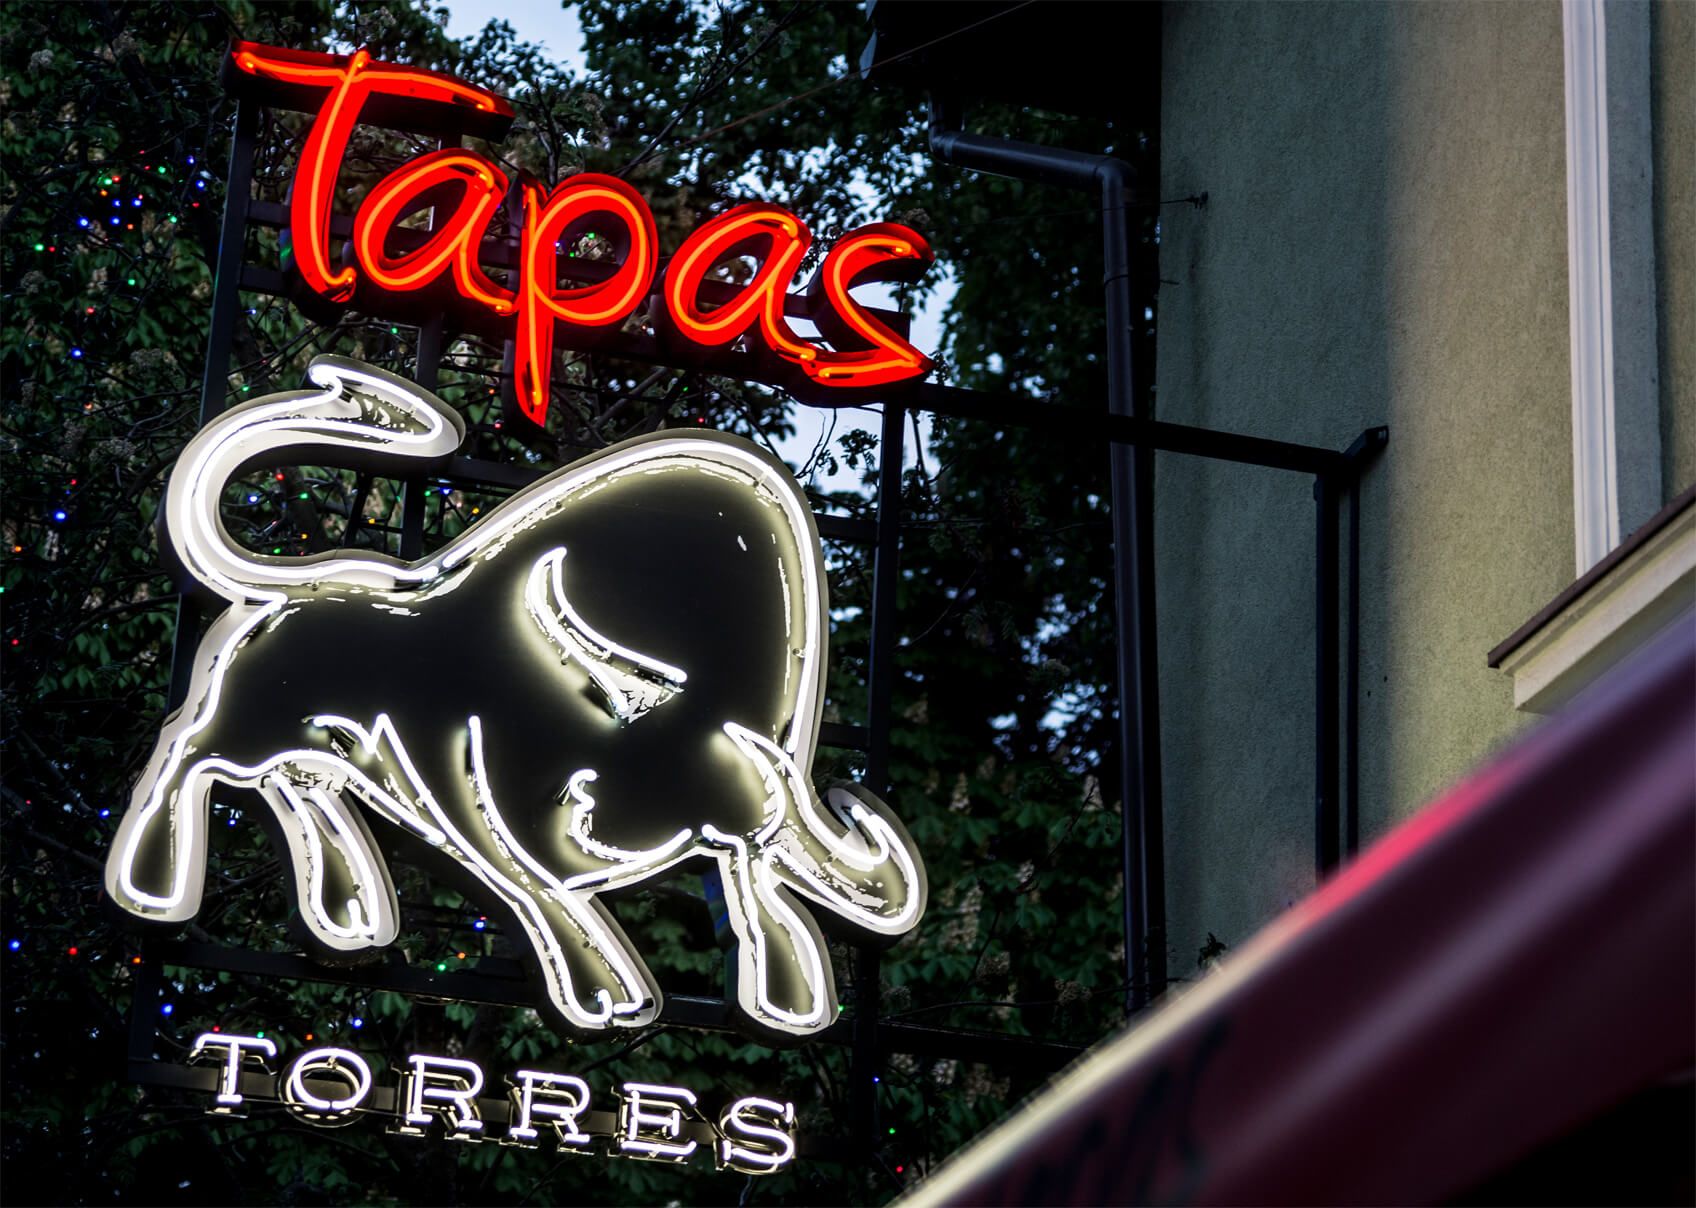 Tapas torres - neon-tapas-torres-byk-neon-above-entry-to-the-restaurant-neon-lighted-neon-spatial-neon-at-height-neon-on-a-base-logo-neon-sopot-spainese-restaurant